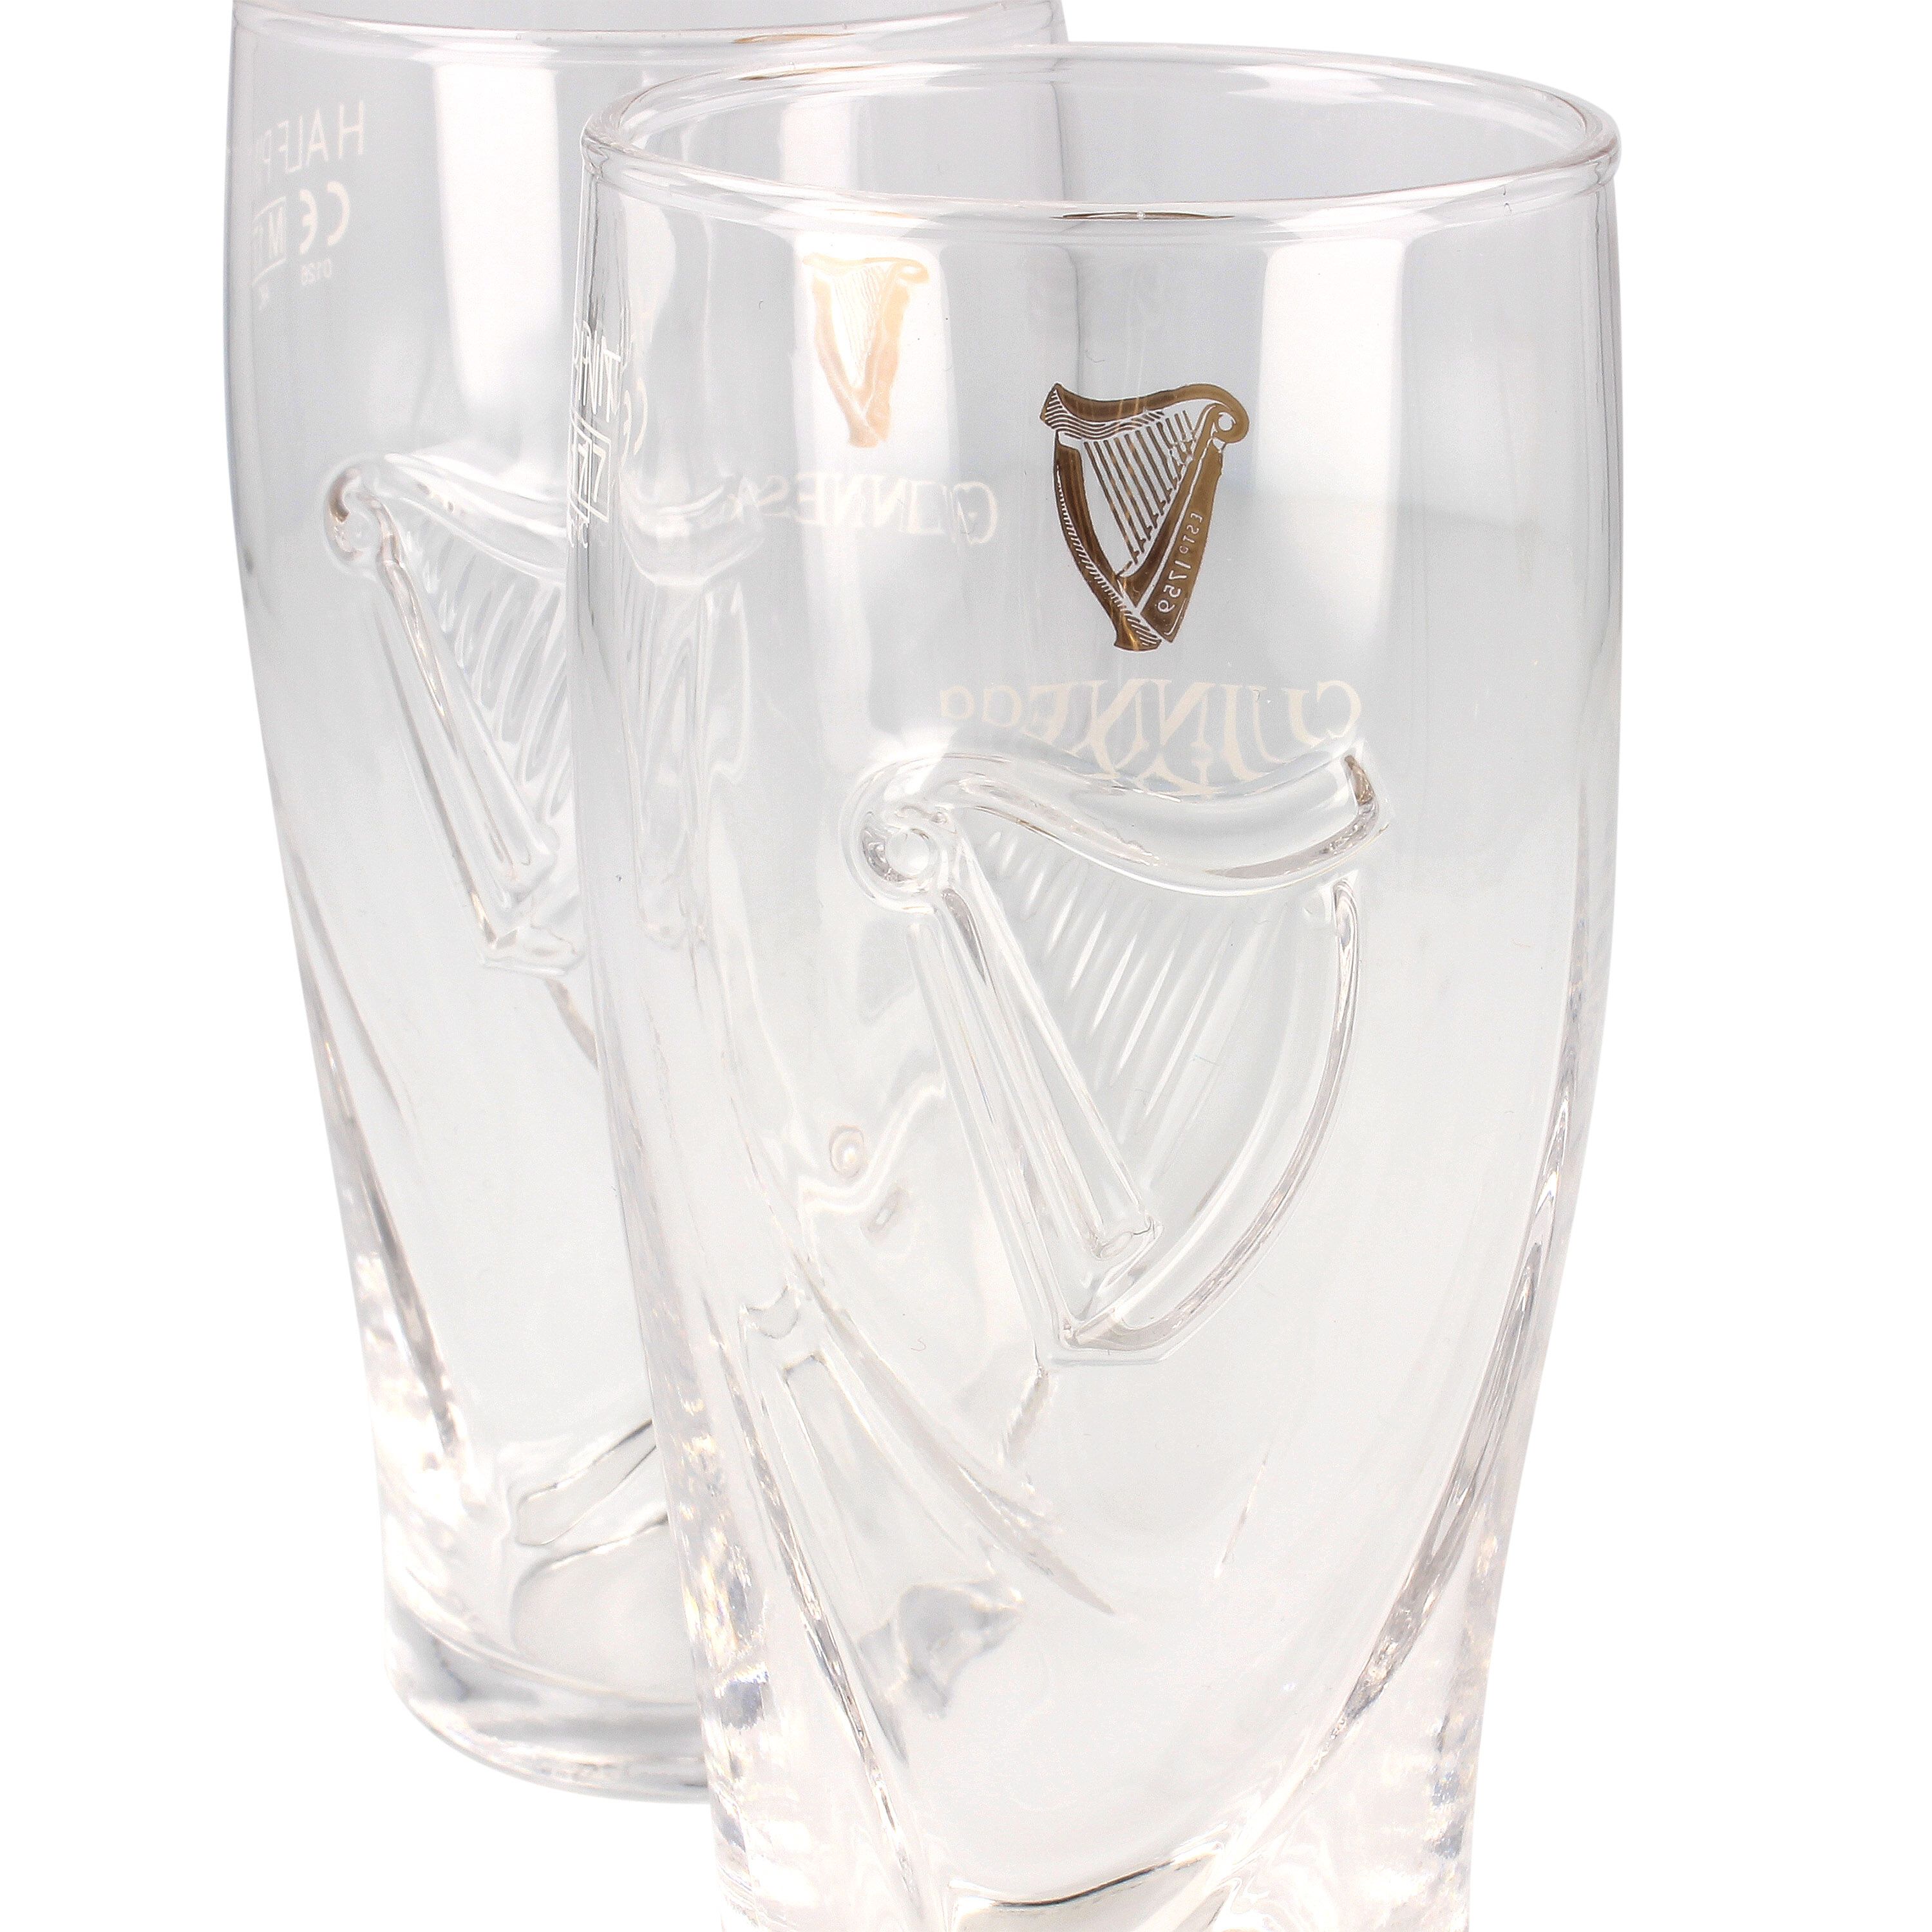 Details about   2x Guinness Embossed Harp Pint Glasses 20oz Set of 2 